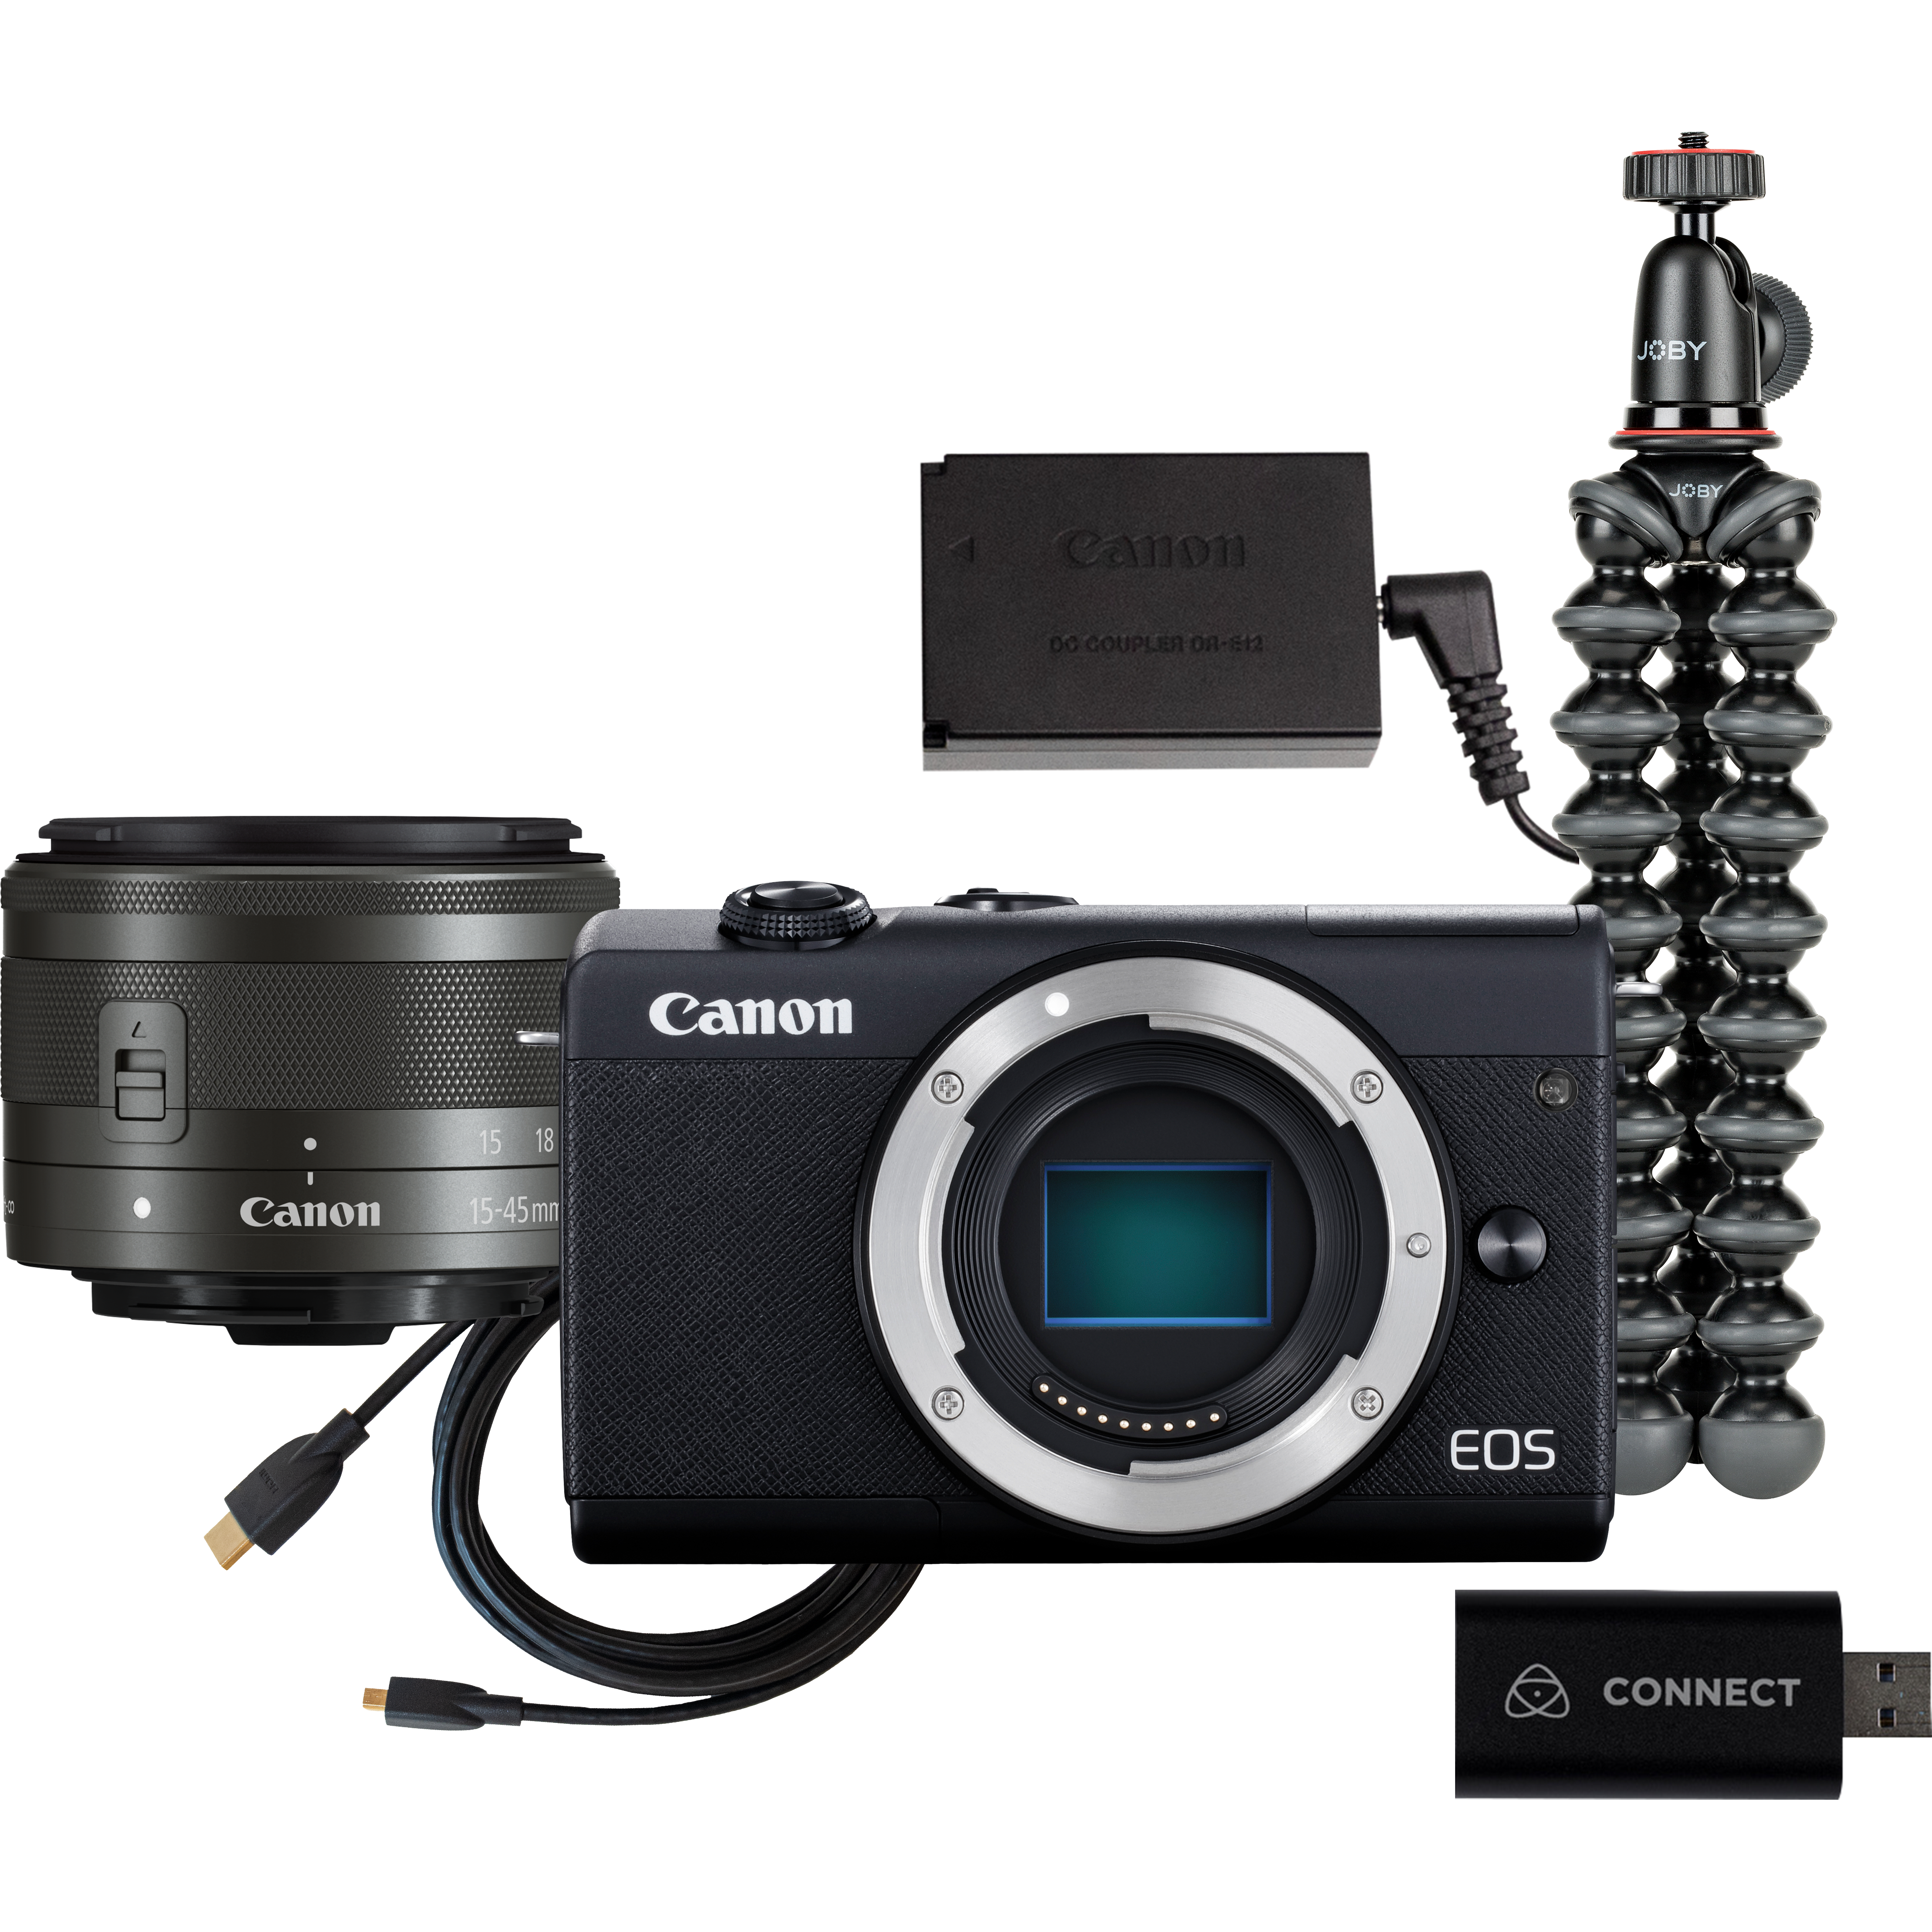 Vlogging cameras from Canon